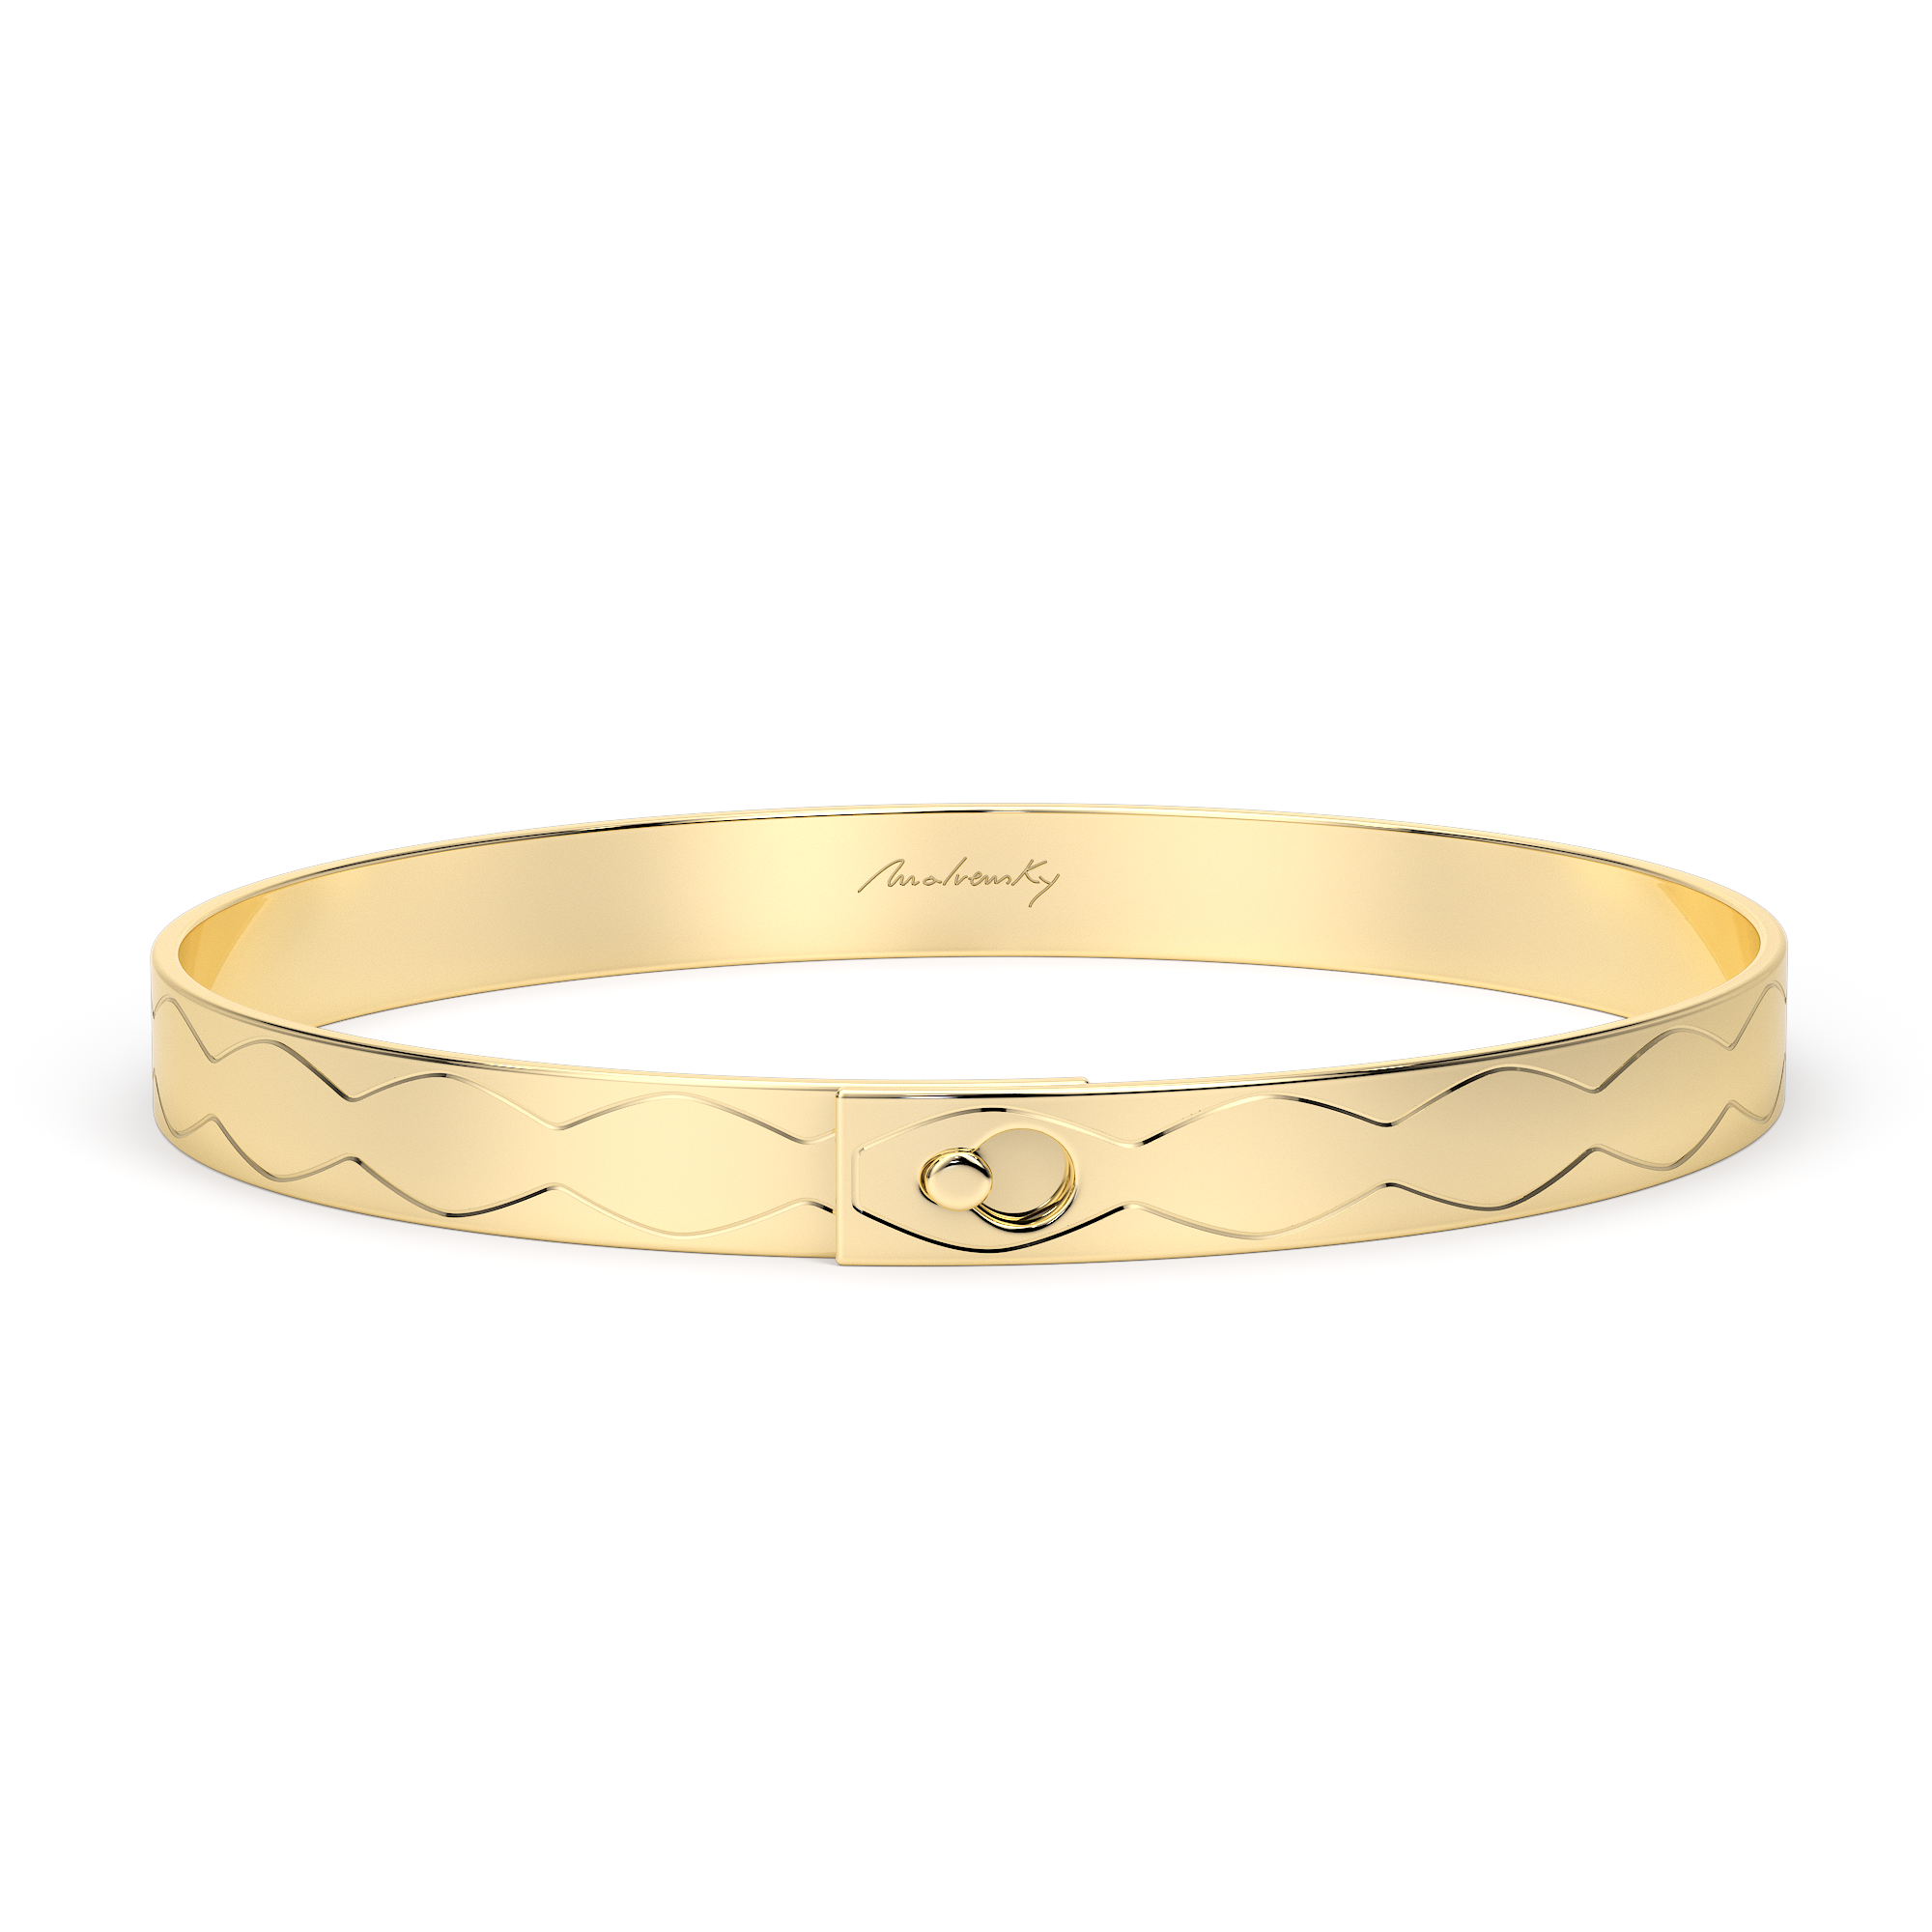 14 KT Graphic Infinity Bracelet in yellow gold